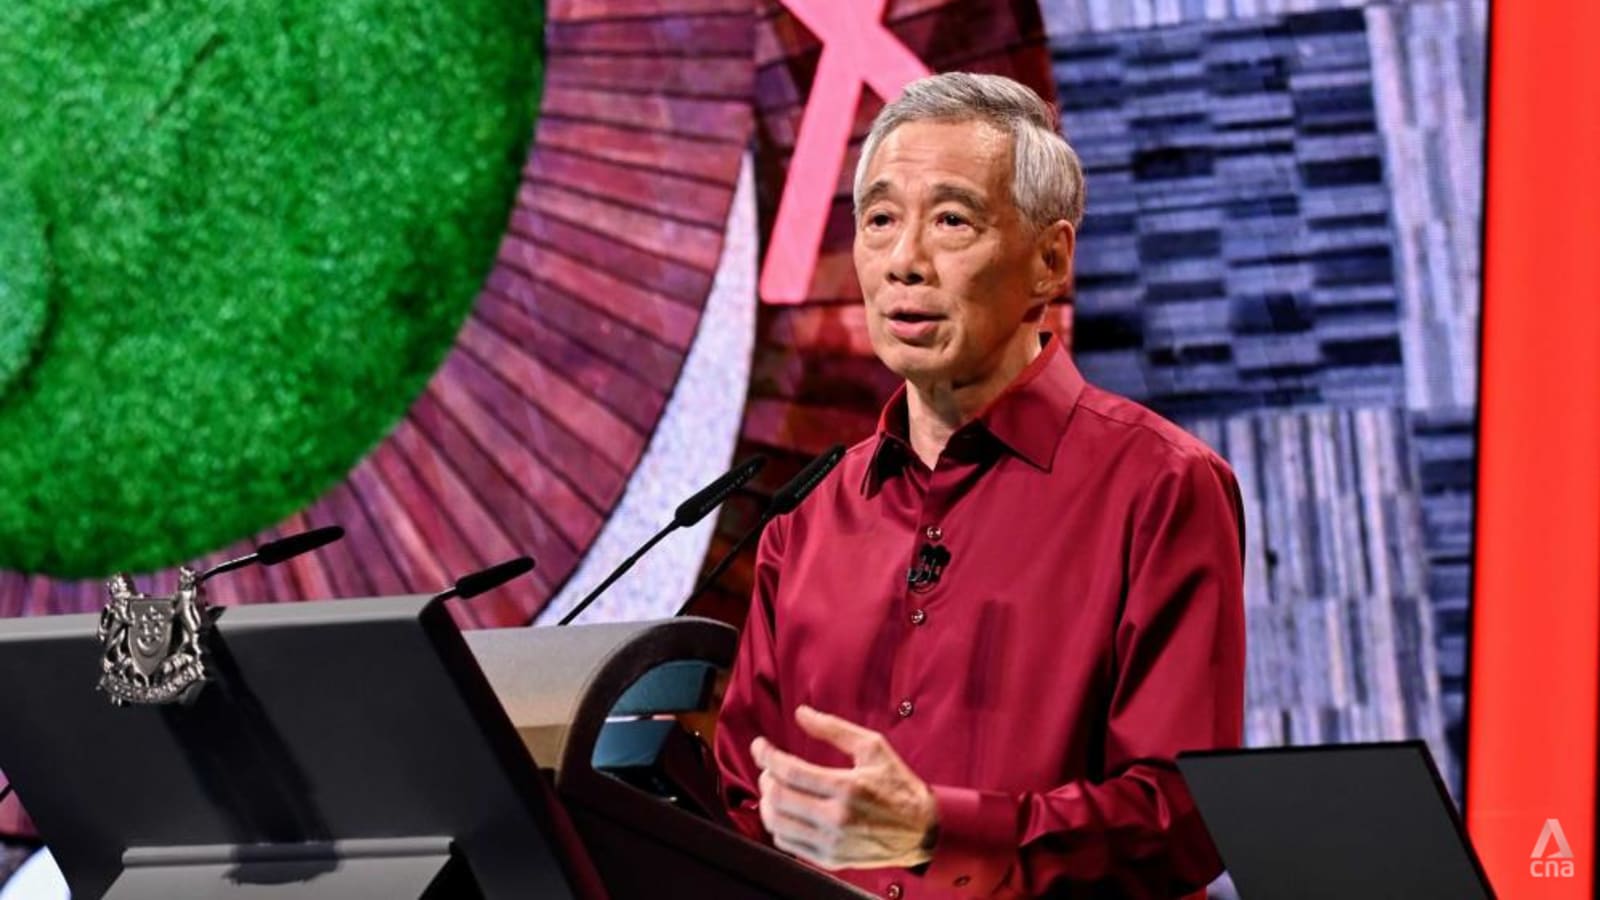 NDR 2022: Prime Minister Lee Hsien Loong’s English speech in full